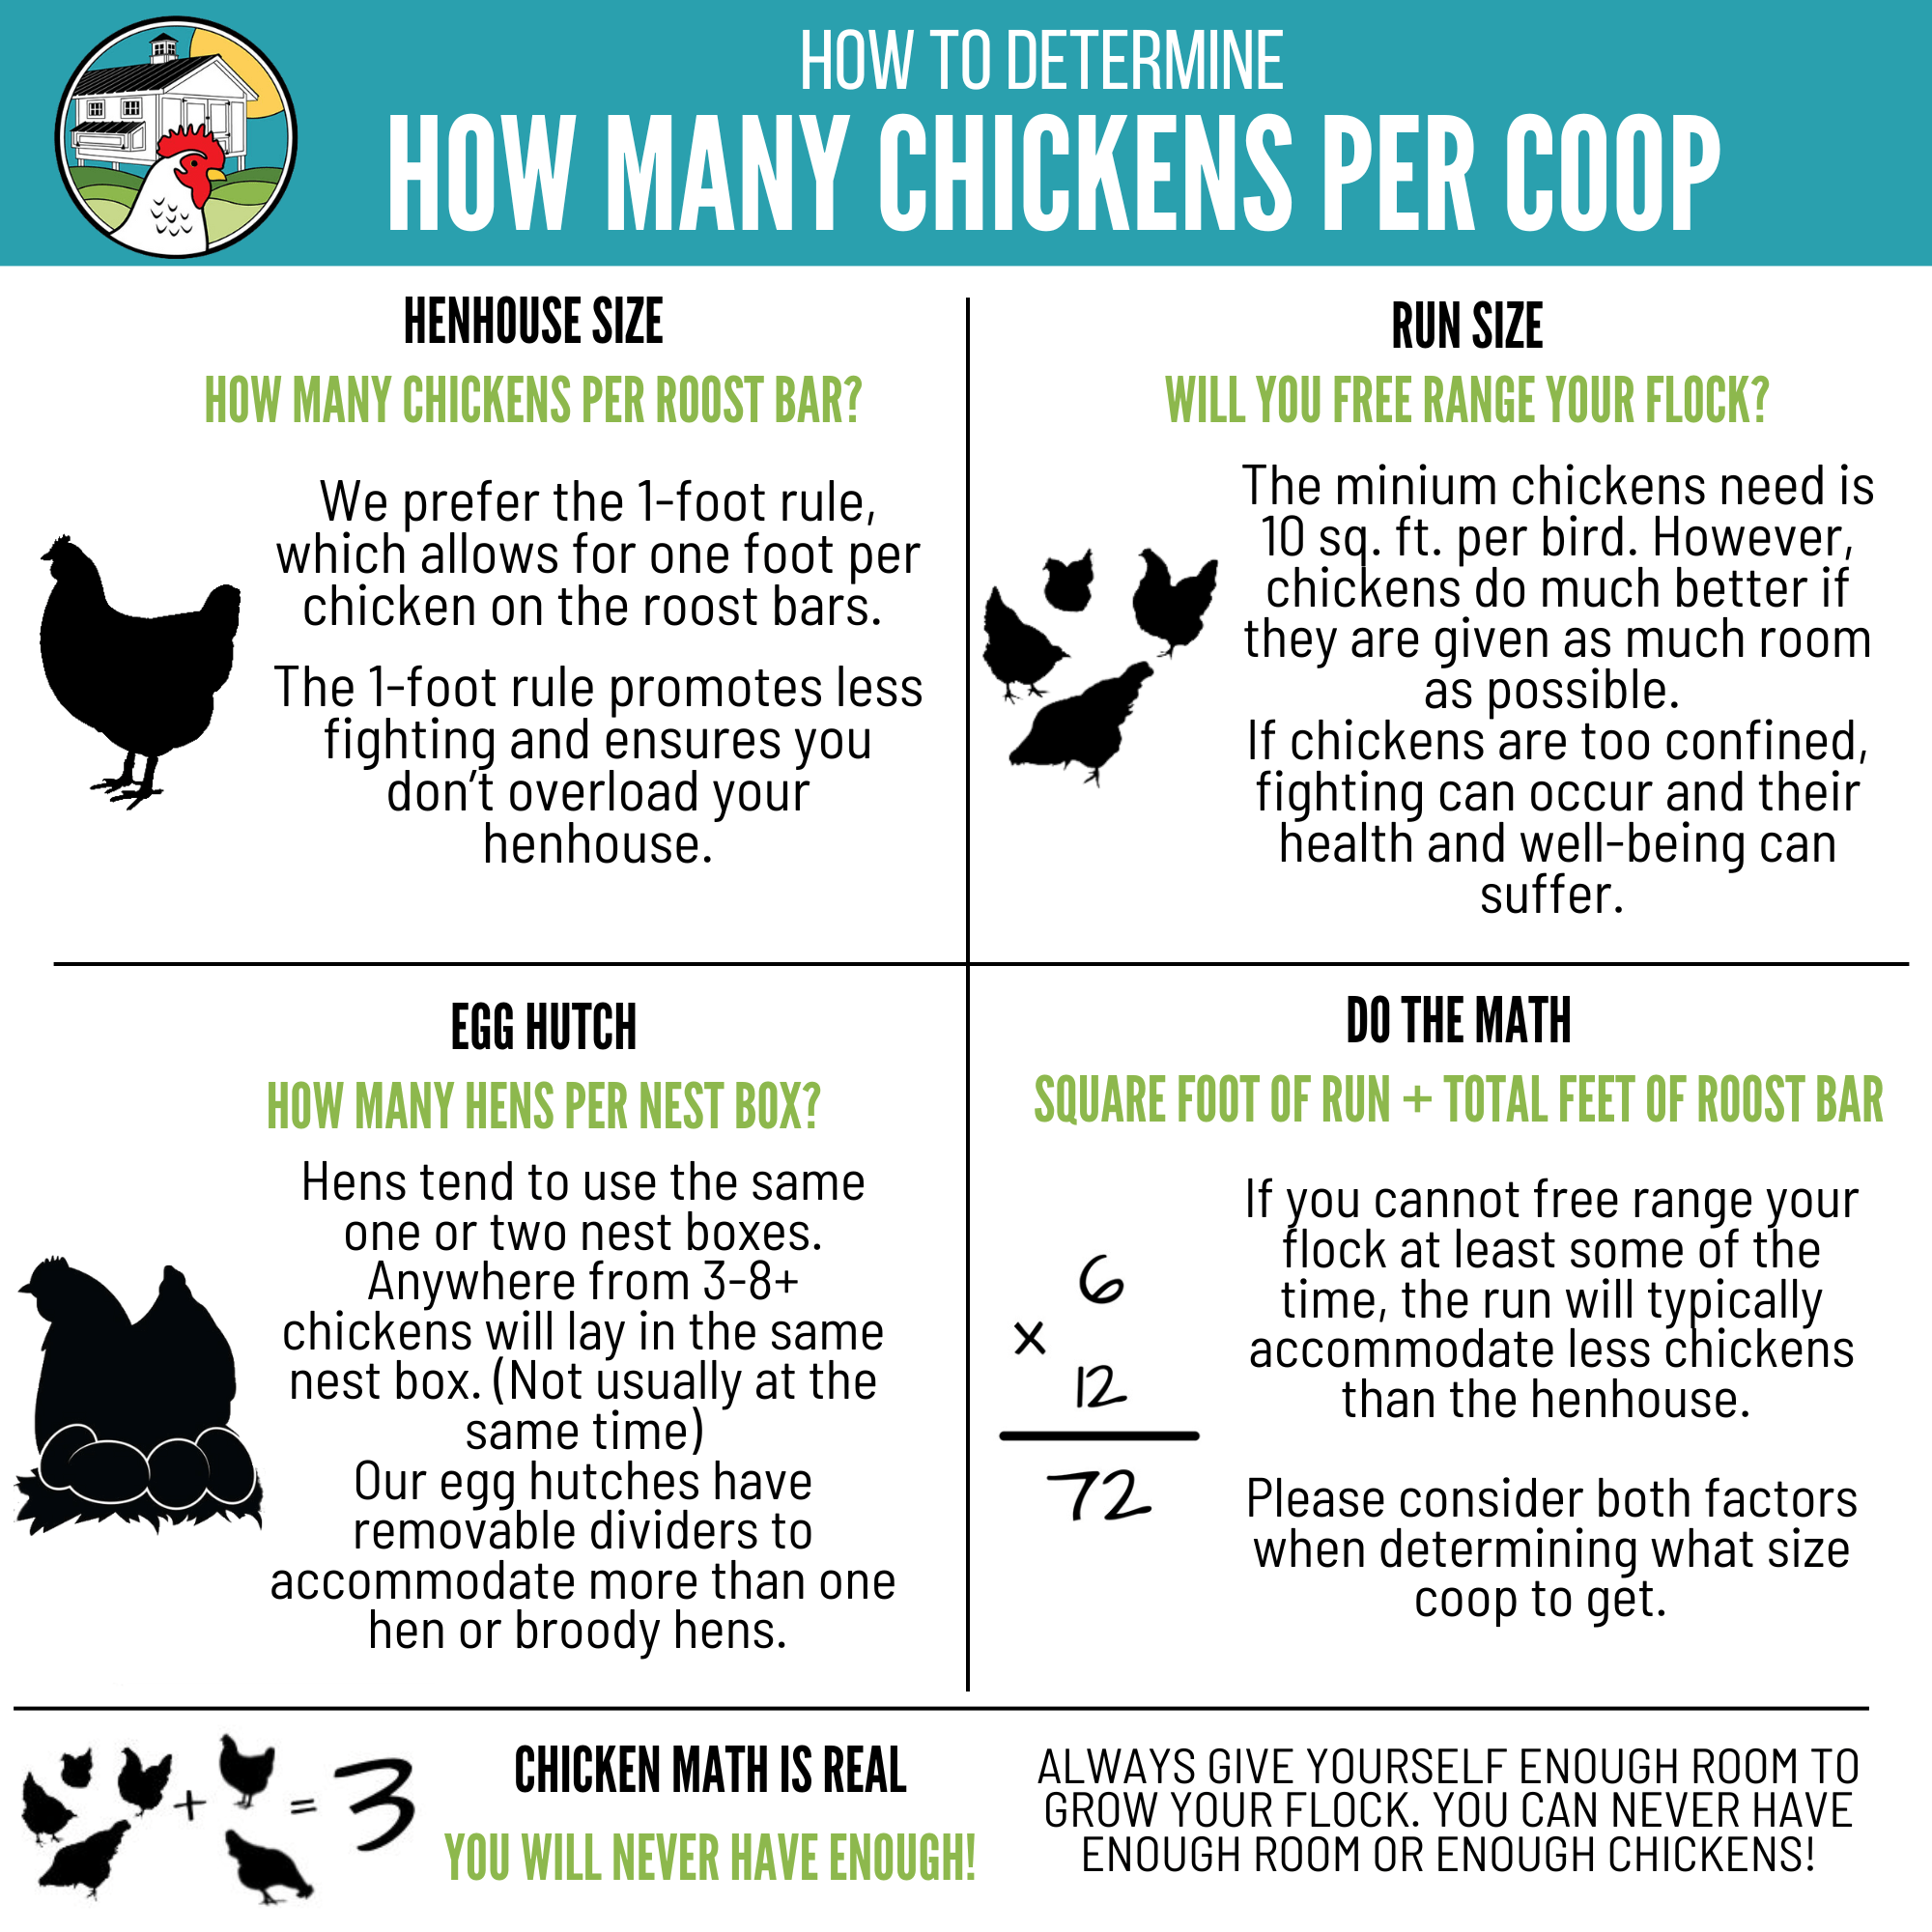 HOW MANY CHICKENS PER COOP GRAPHIC